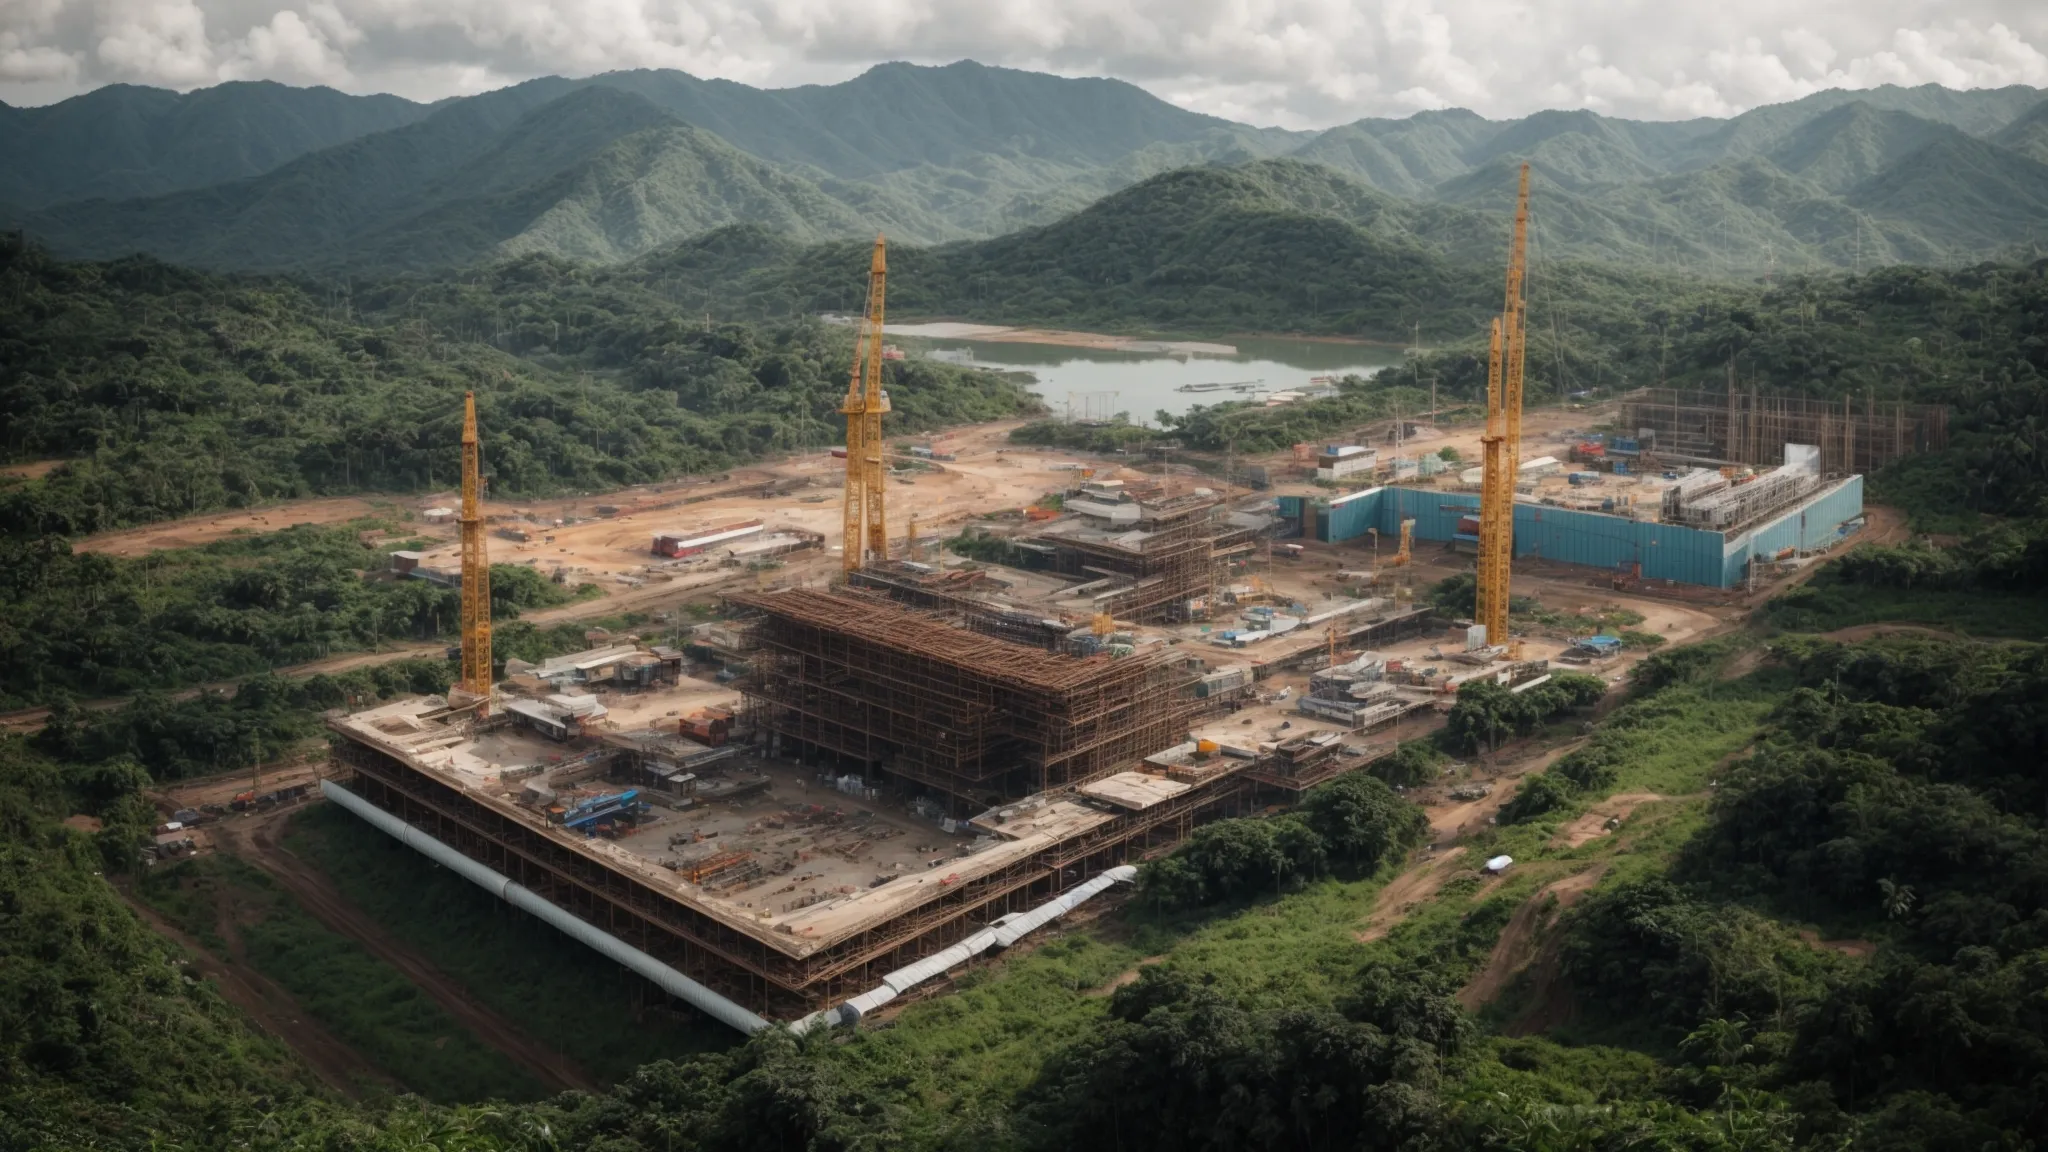 an expansive construction site in honduras with large cranes and modern structures mid-assembly, against a backdrop of lush greenery.